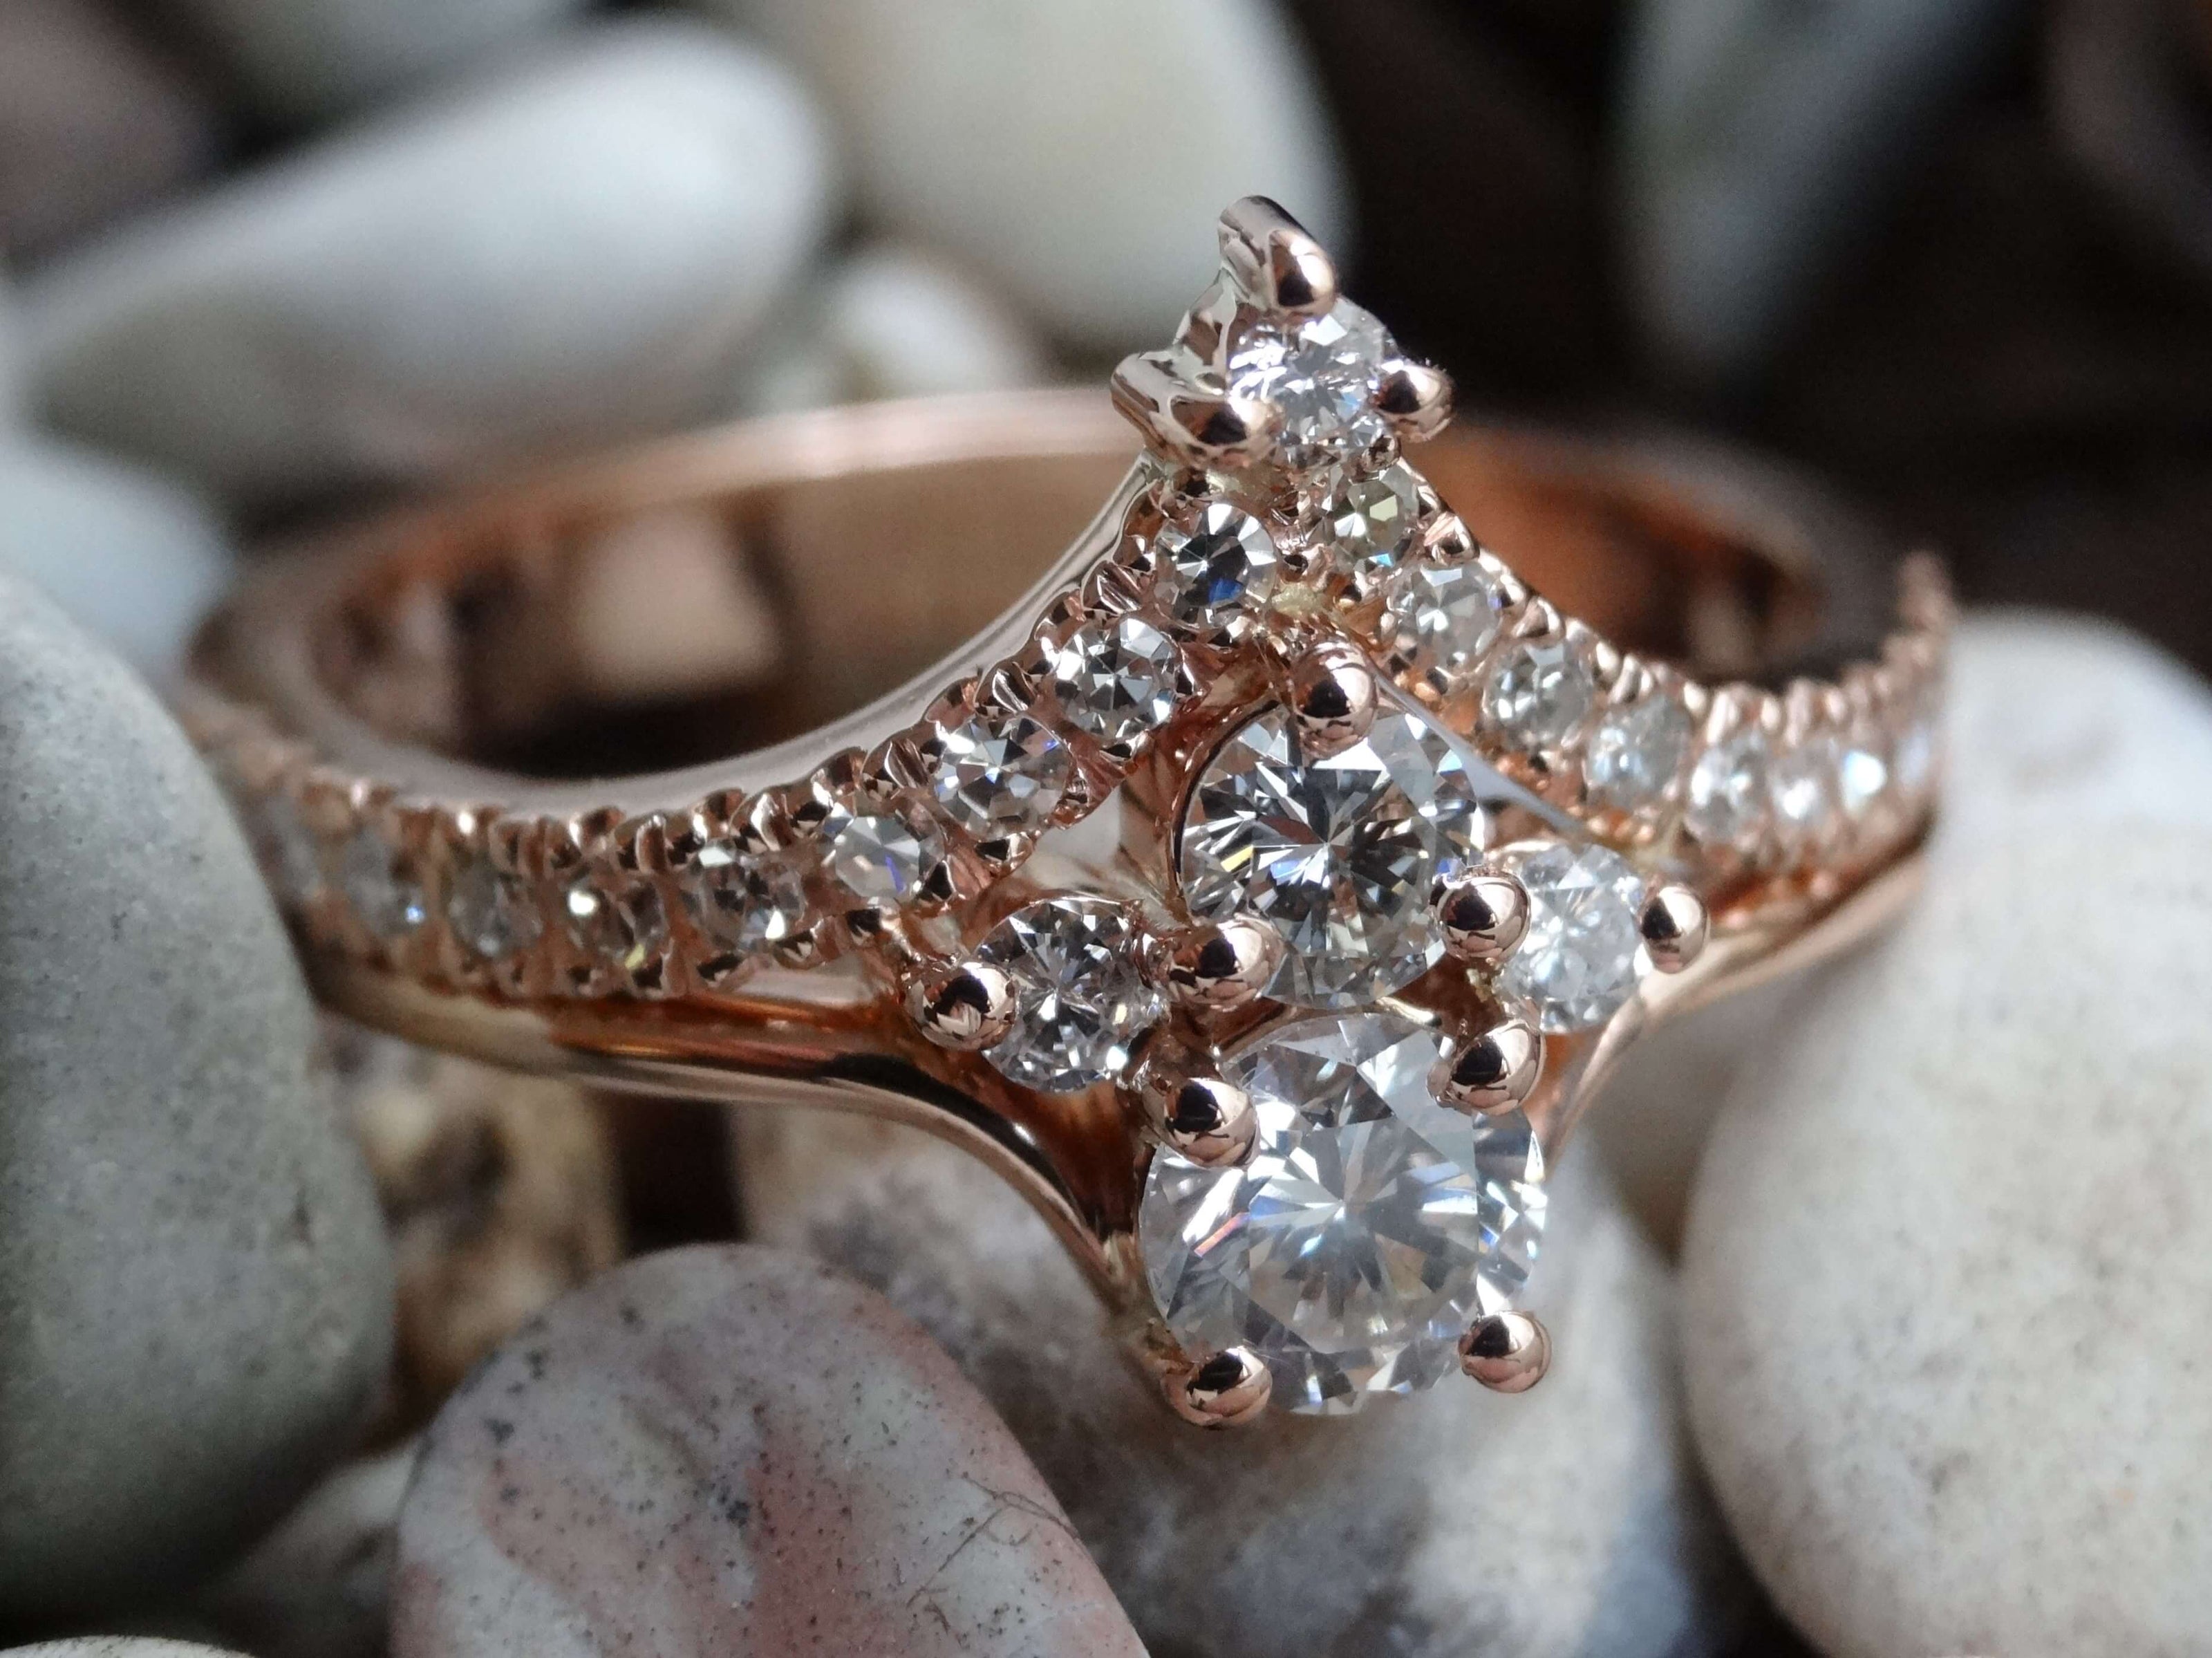 Recycled diamonds and rose gold dress ring, made from up-cycled materials